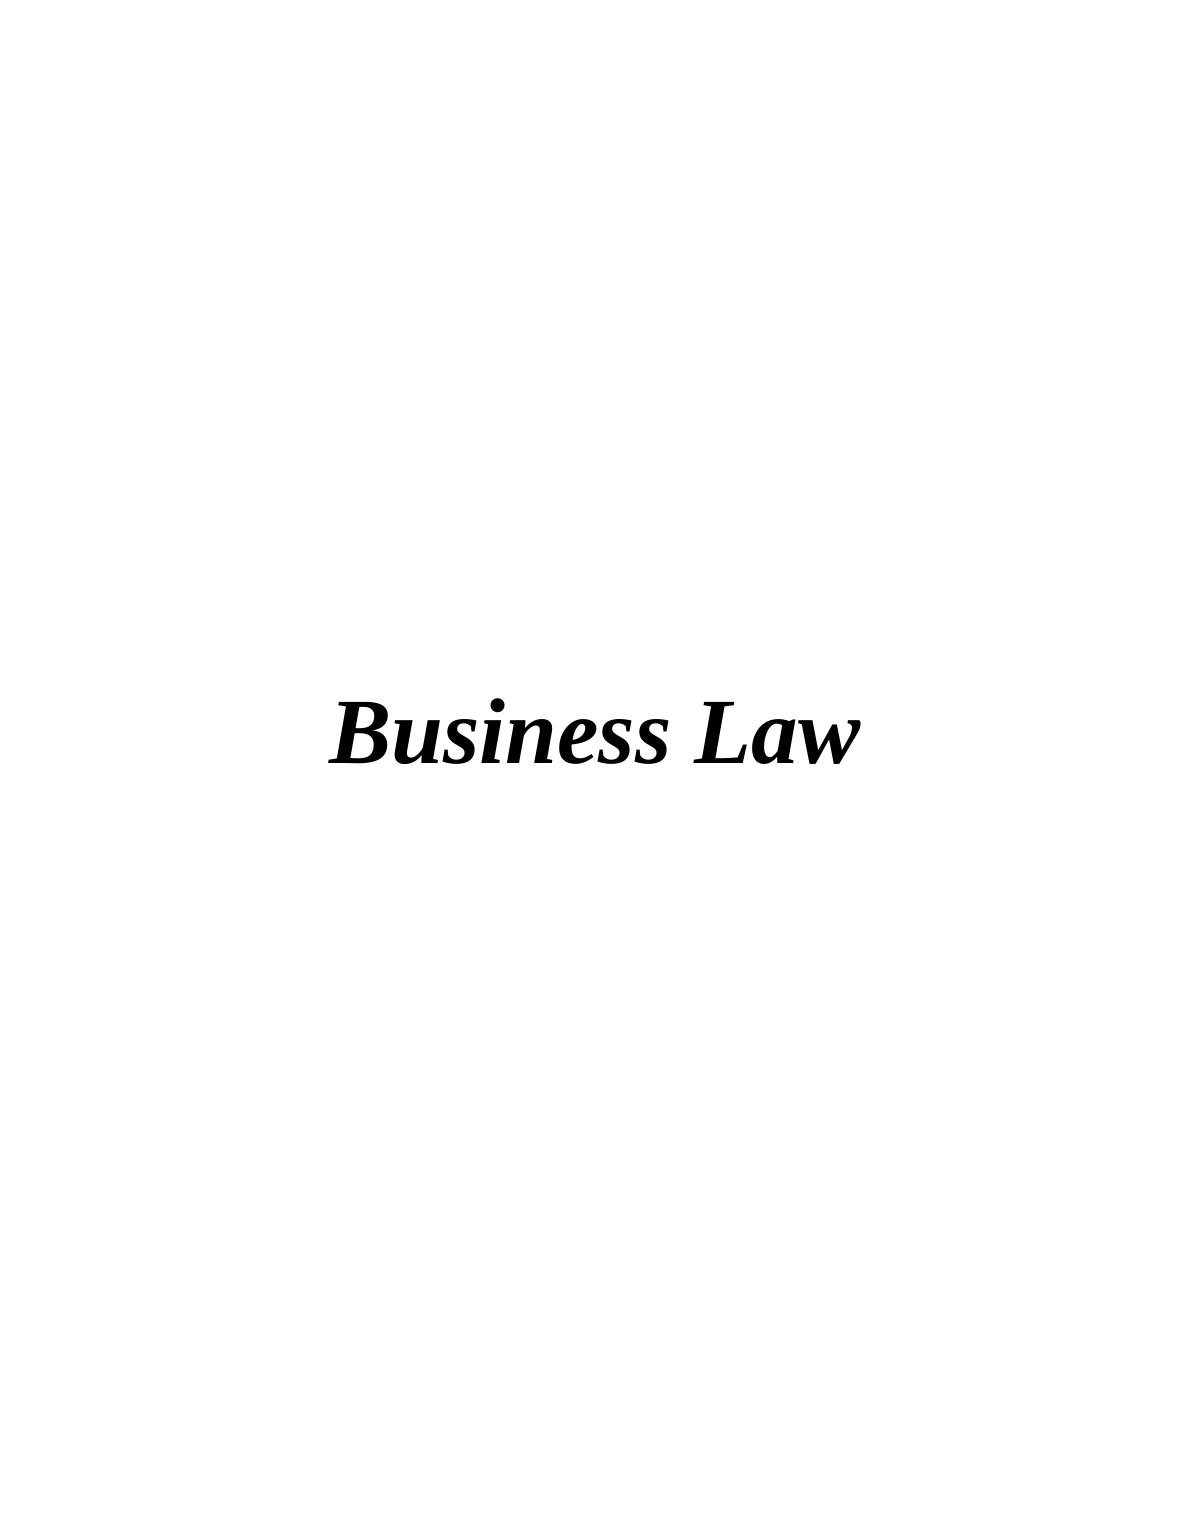 Business Law Assignment Sample UK_1